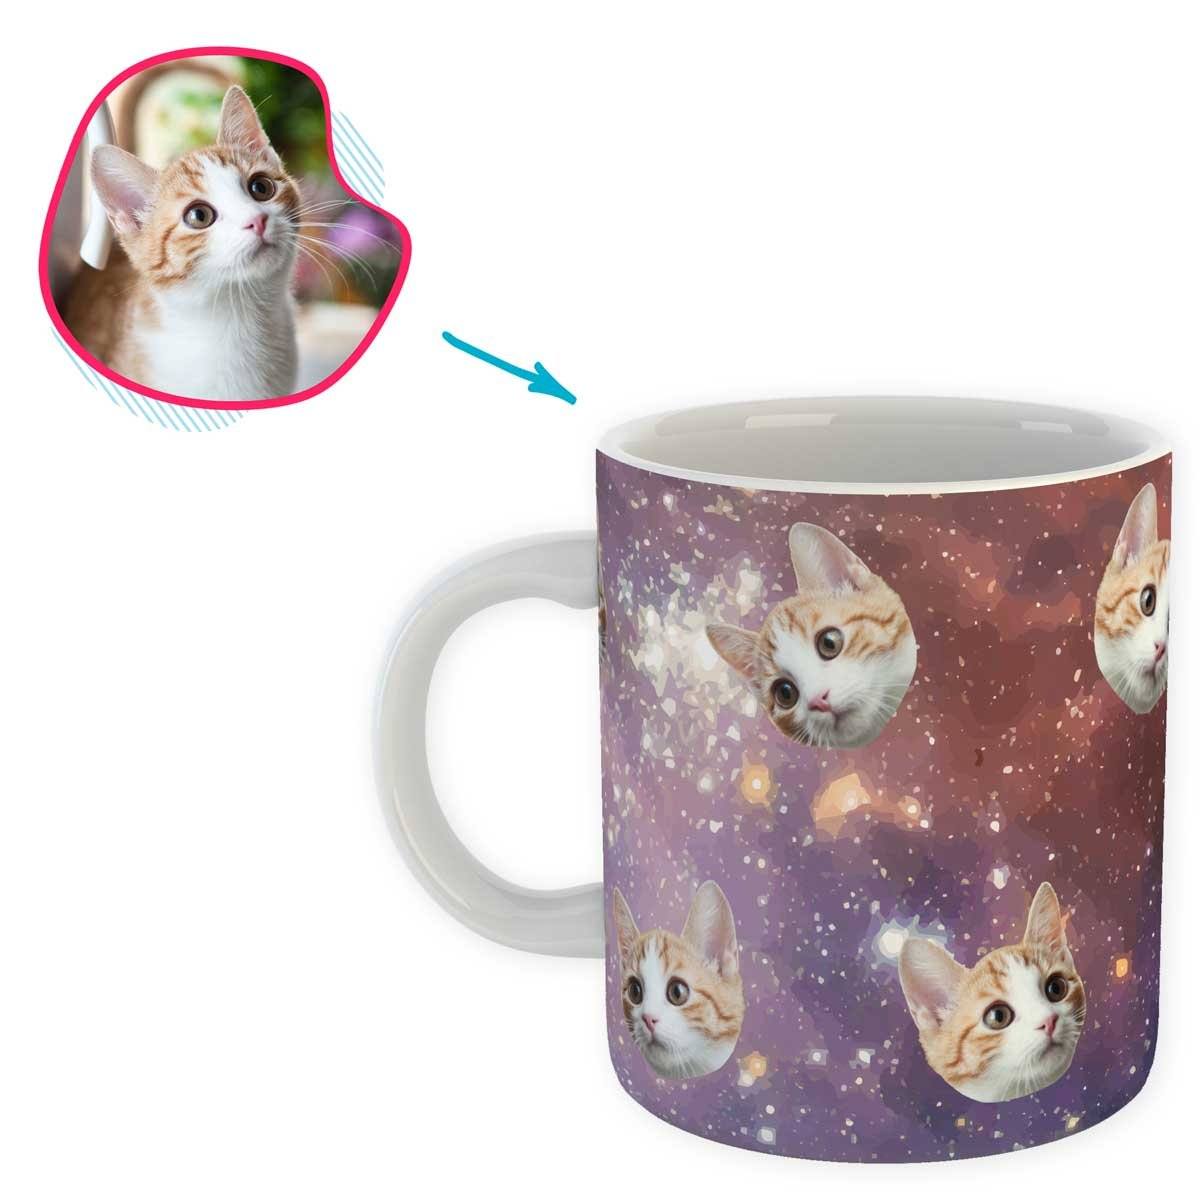 galaxy Galaxy mug personalized with photo of face printed on it